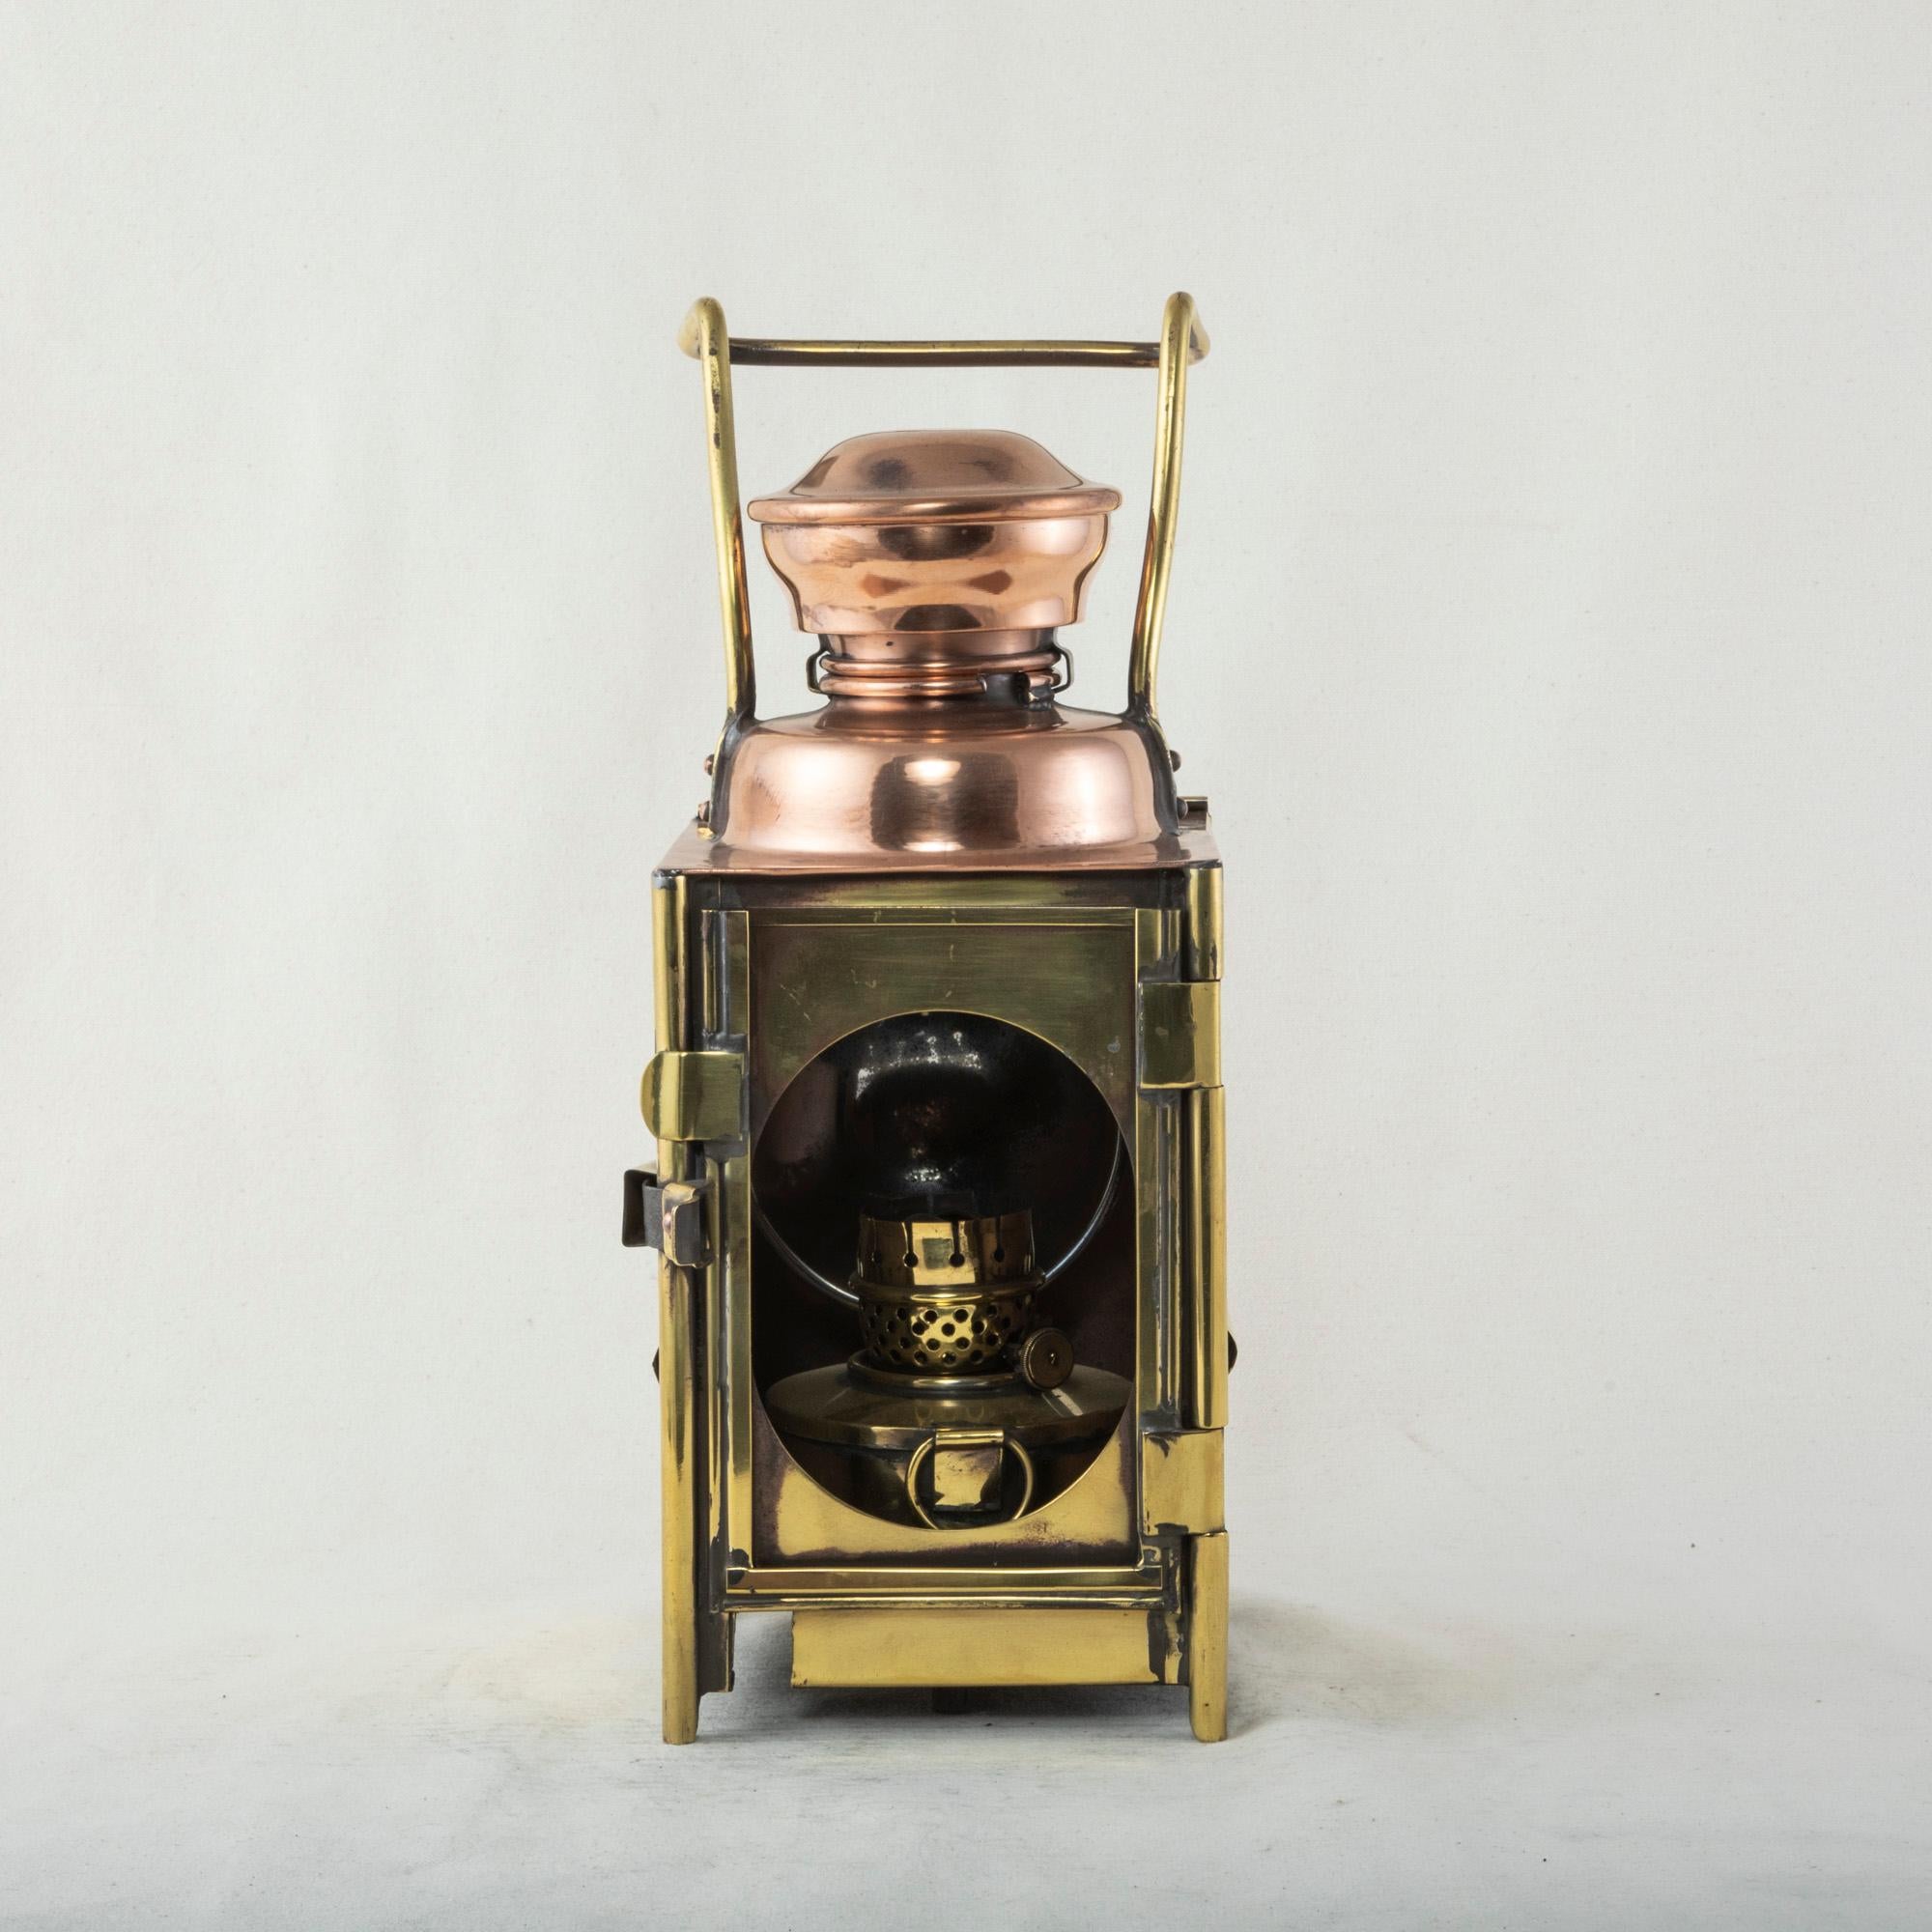 This French brass and copper railroad lantern from the early twentieth century is marked on the side SNCF (Societe Nationale des Chemins de Fer), the national railroad company of France. The lantern is capped with copper and has a door on one side